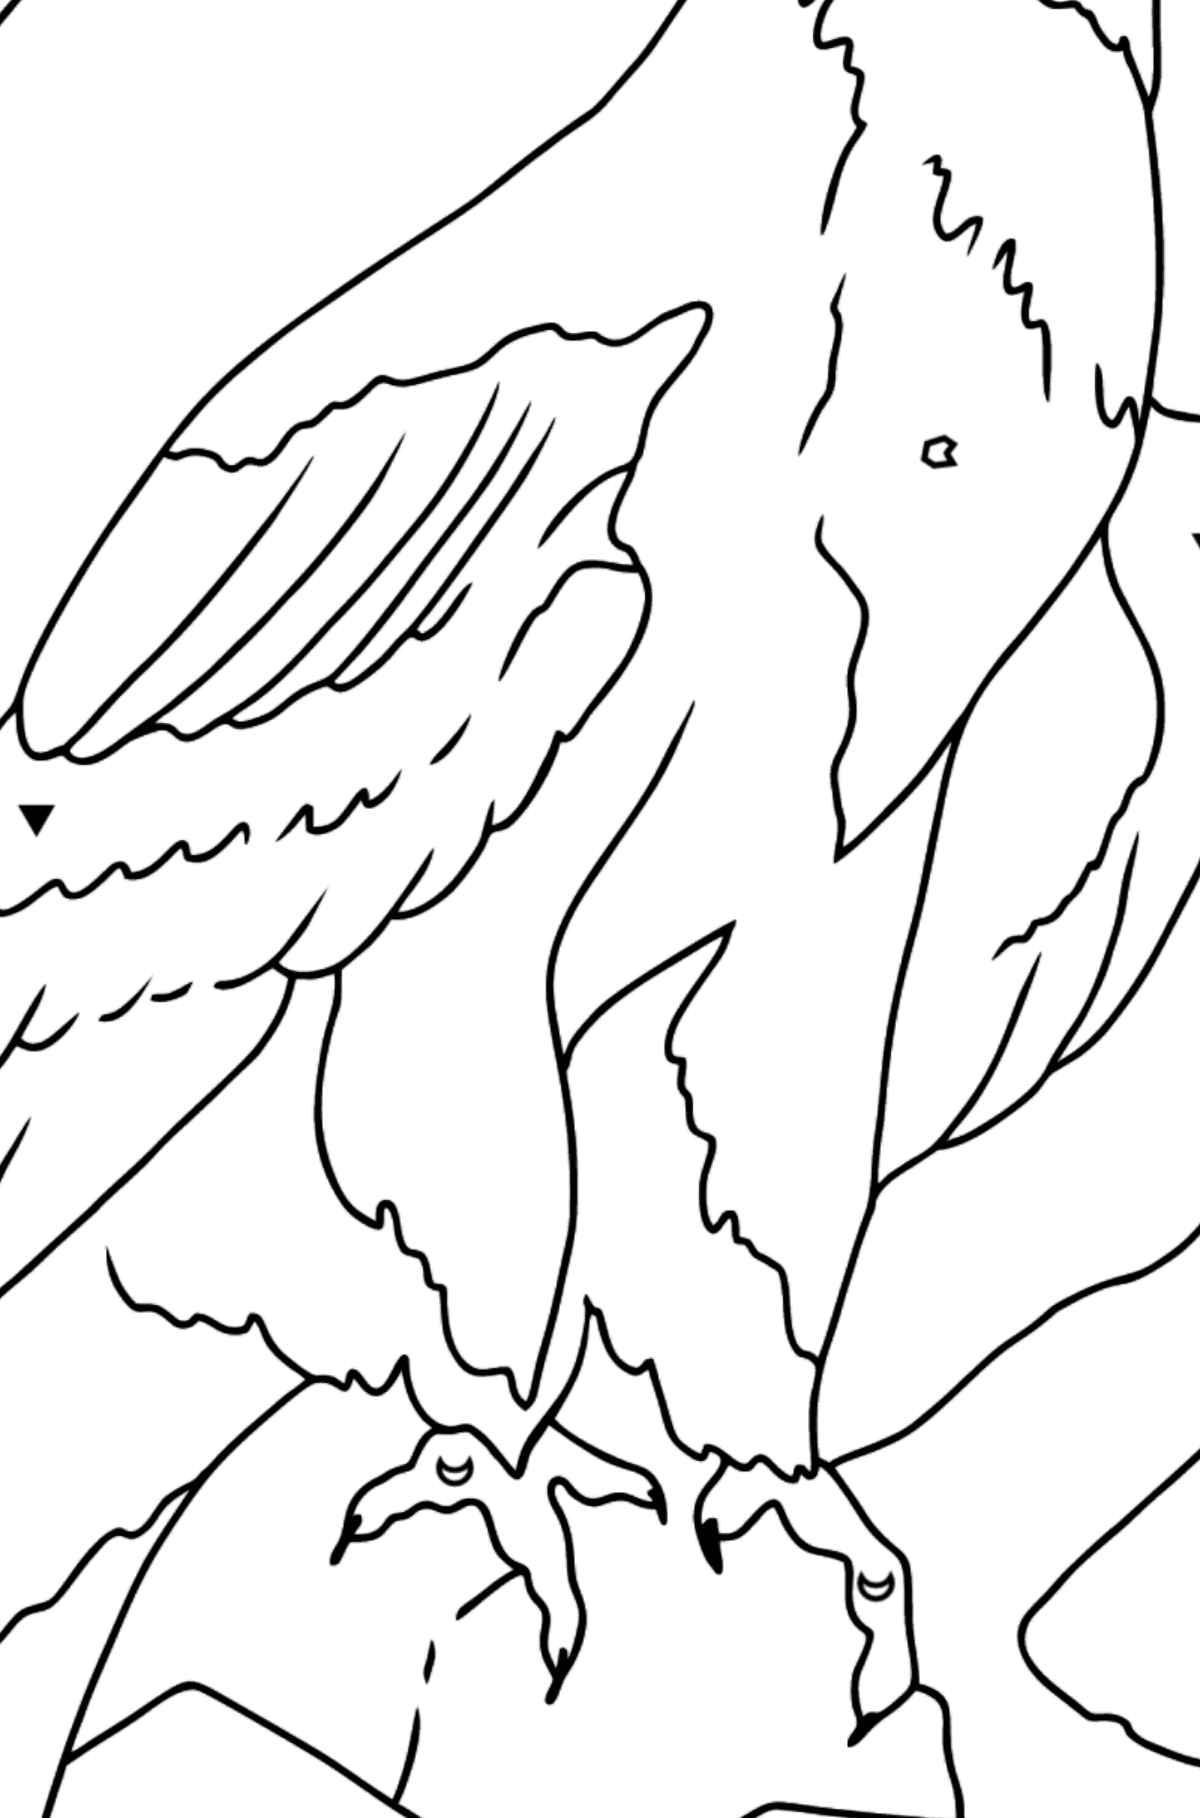 Coloring Page - An Eagle is on the Hunt - Coloring by Symbols and Geometric Shapes for Kids